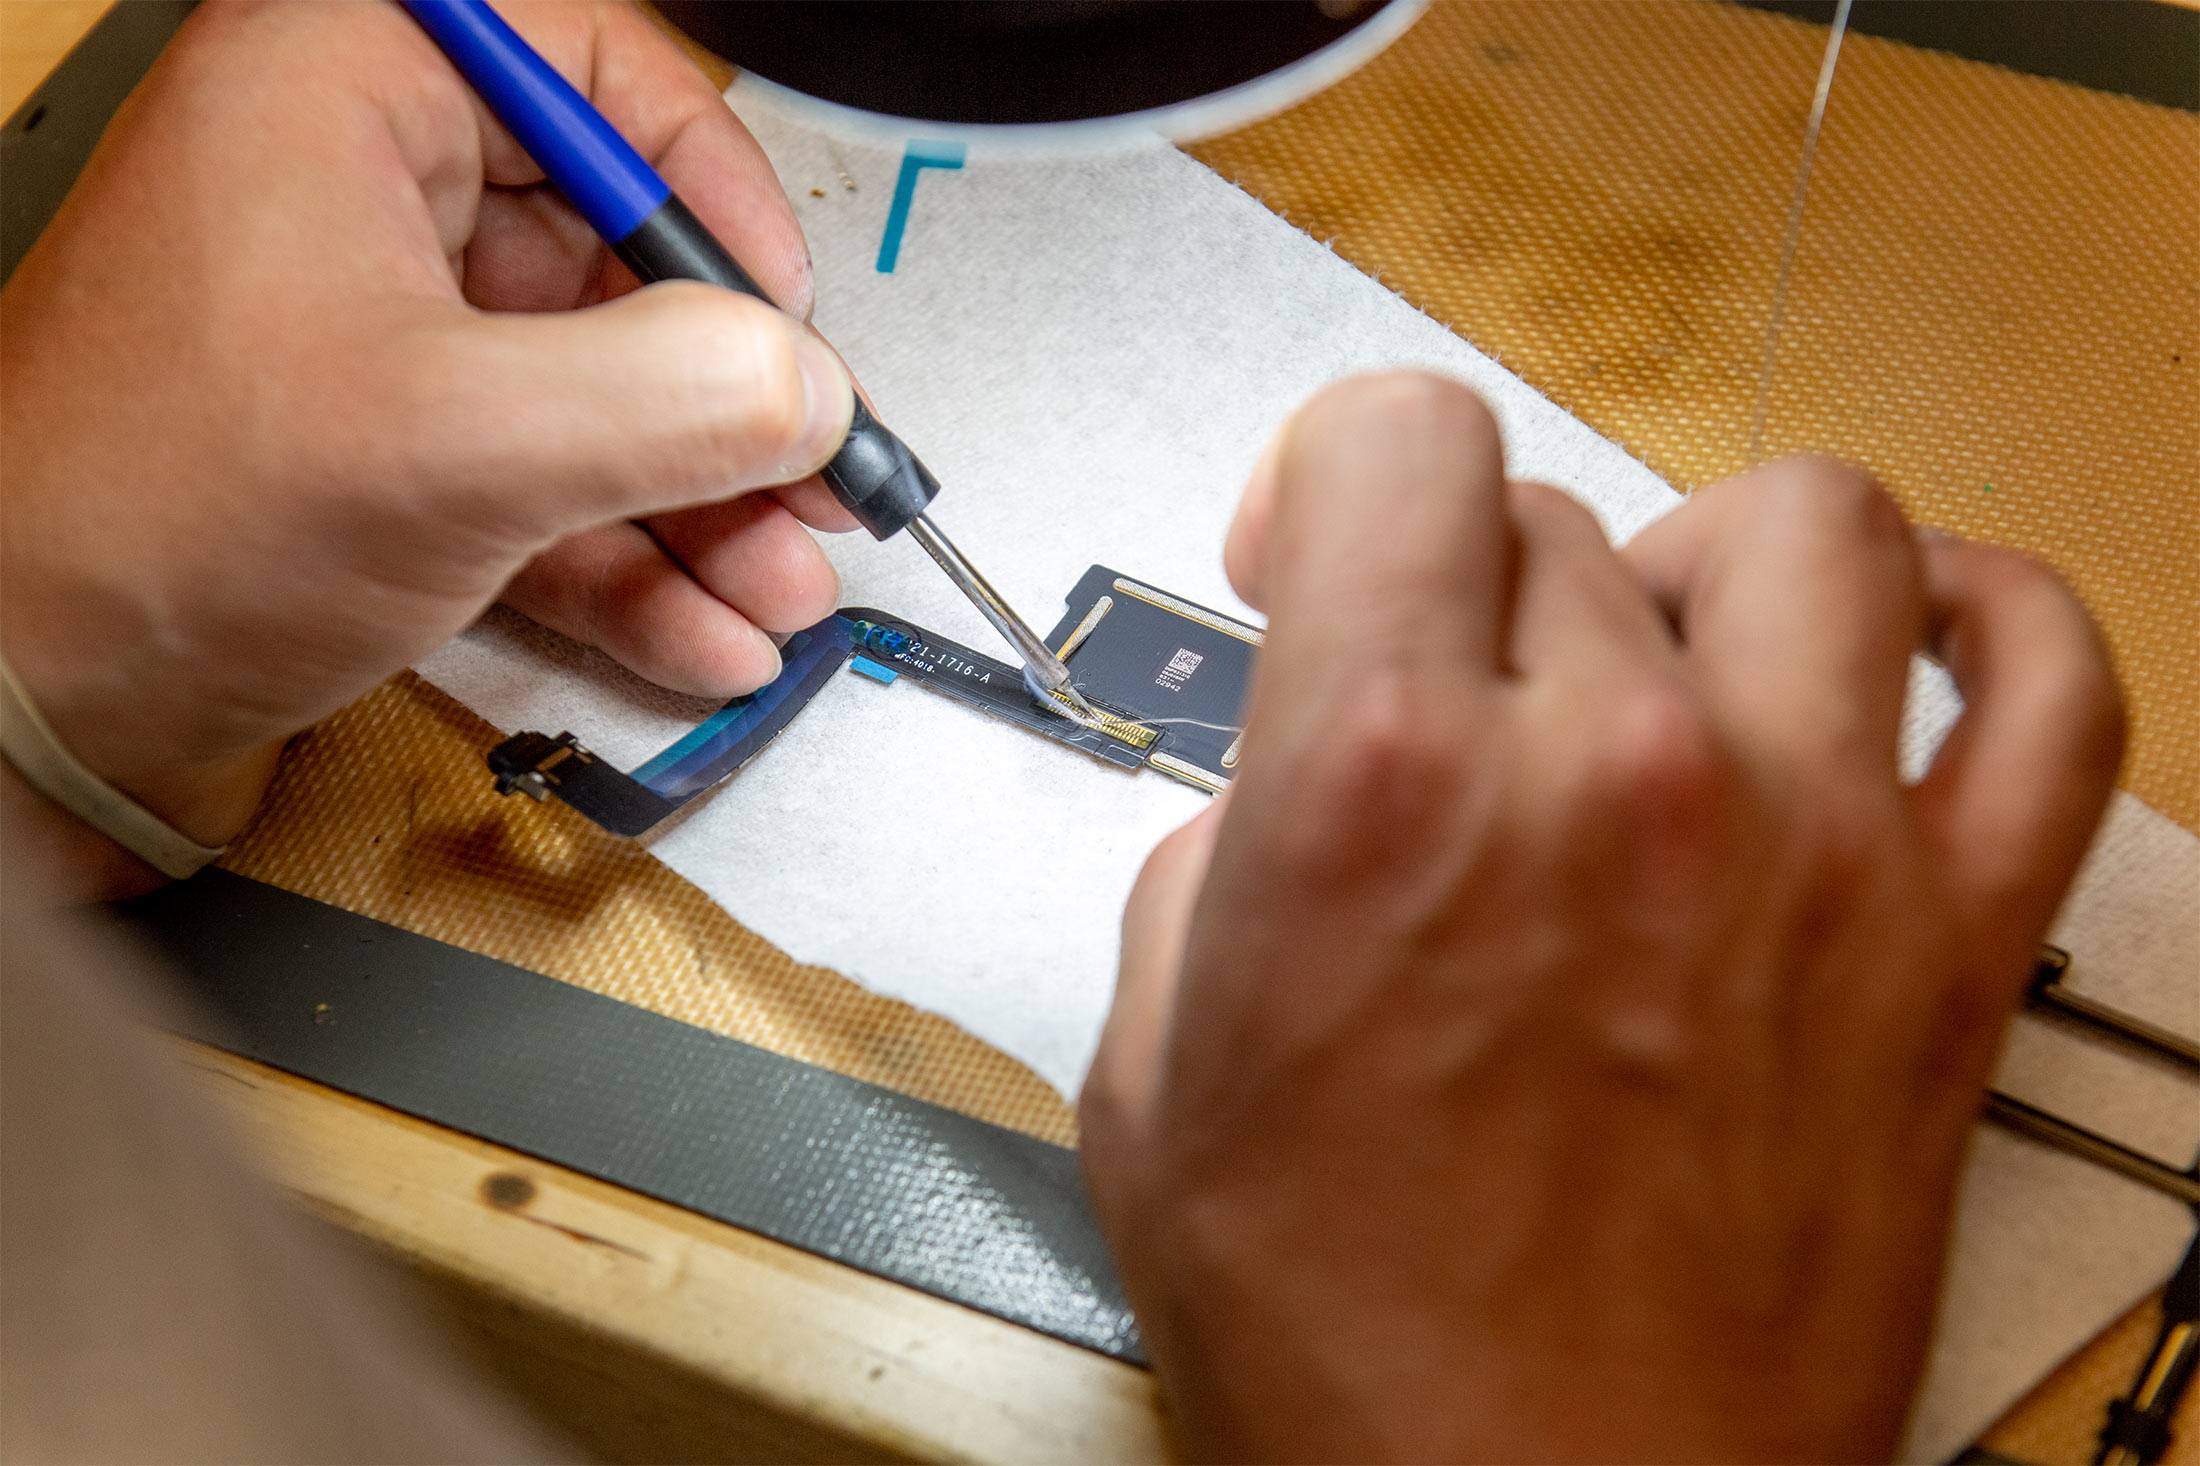 Microsoft and Apple Wage War on Gadget Right-to-Repair Laws - Bloomberg